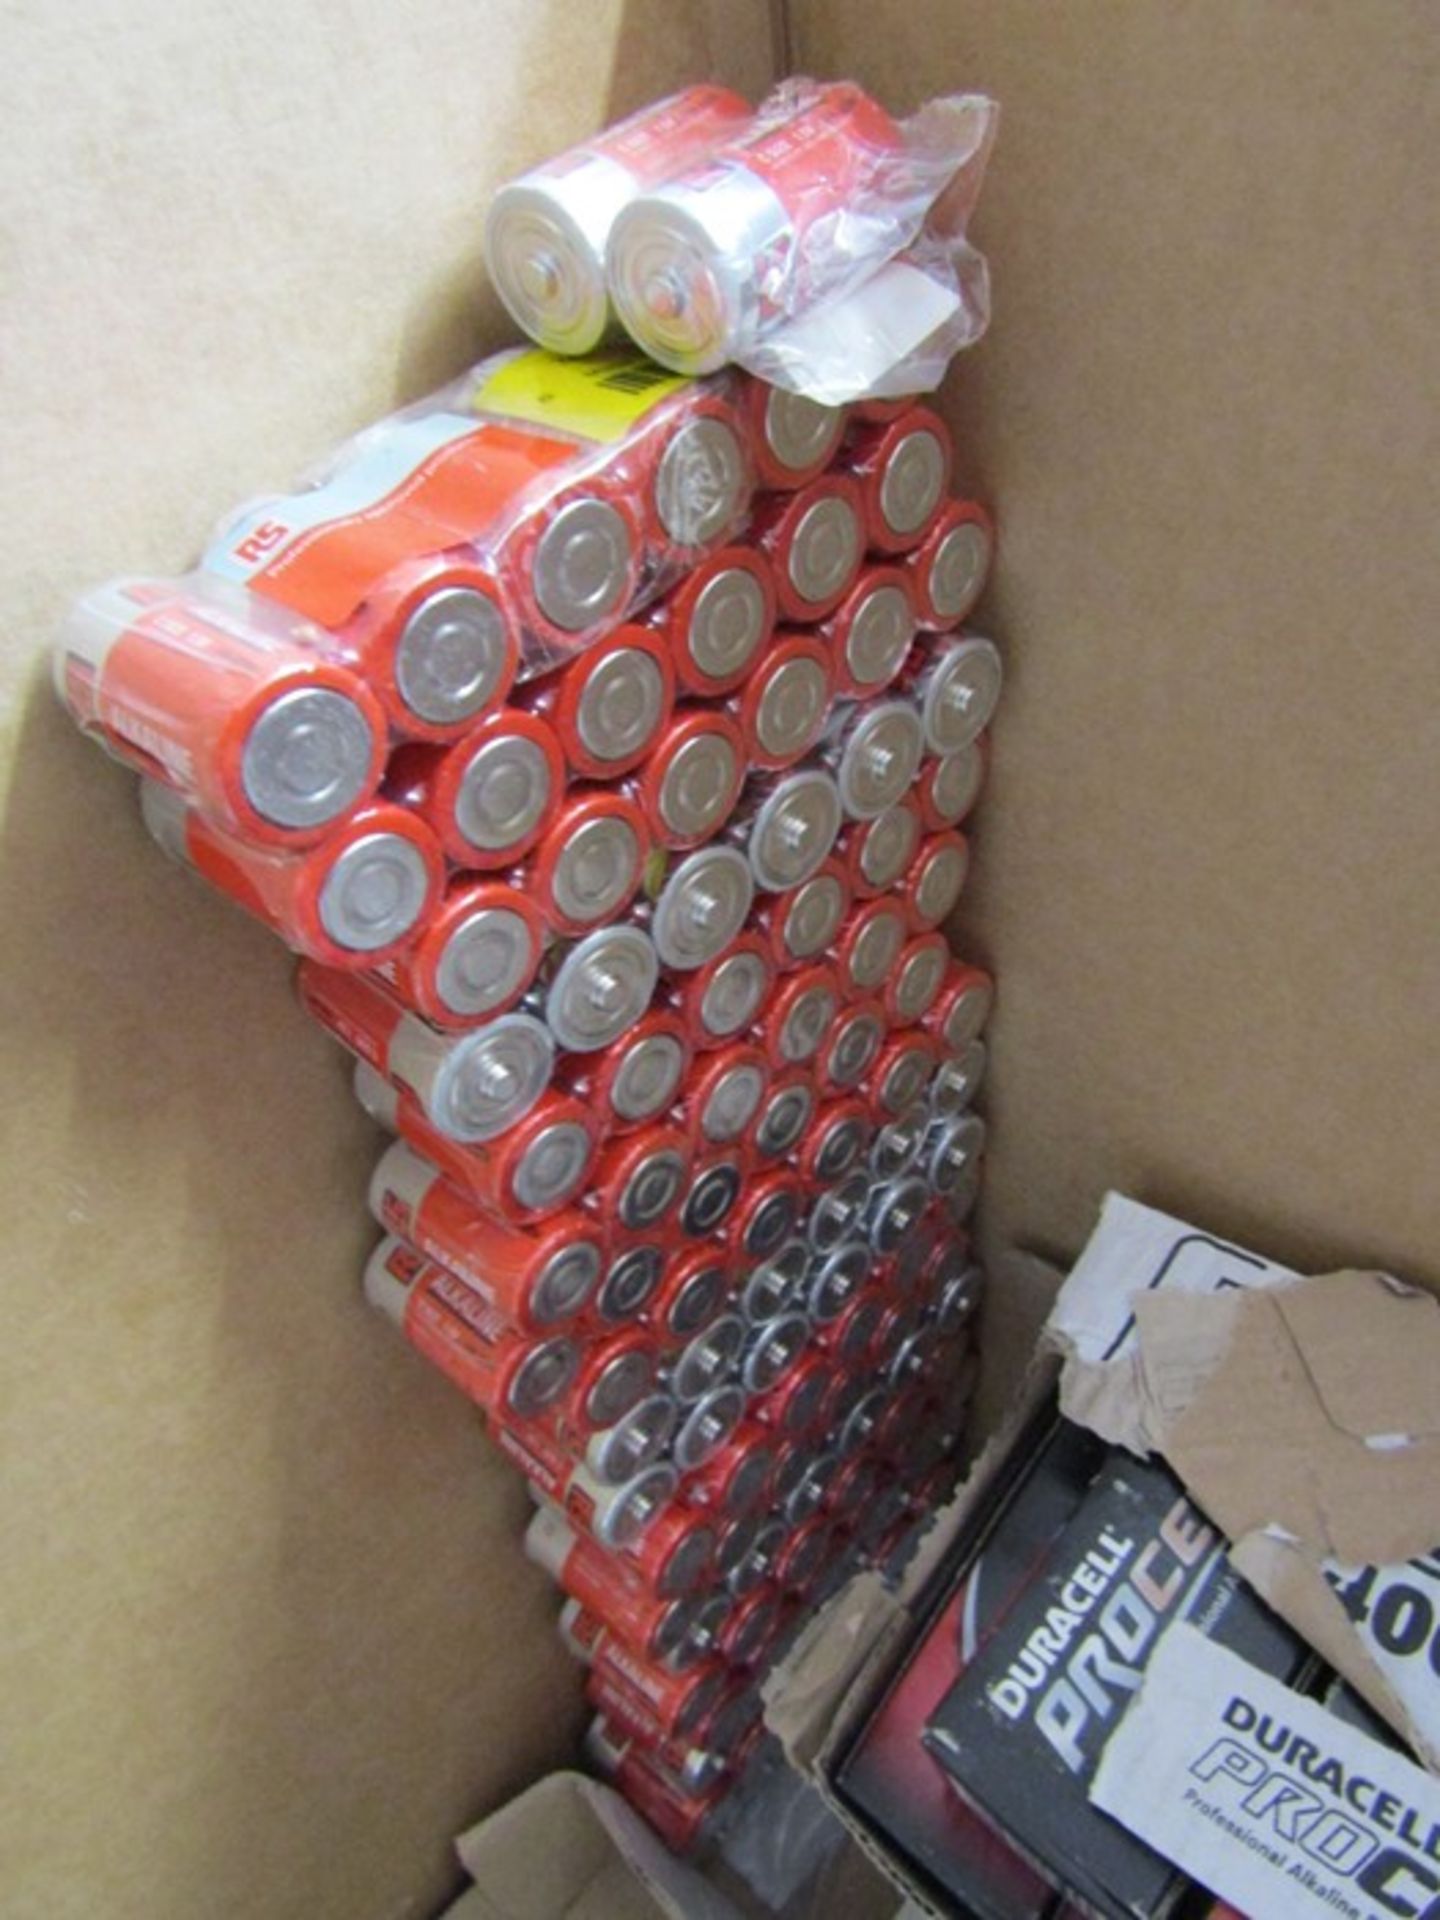 Quantity of Batteries (C and D Cell) - around 370 batteries in total